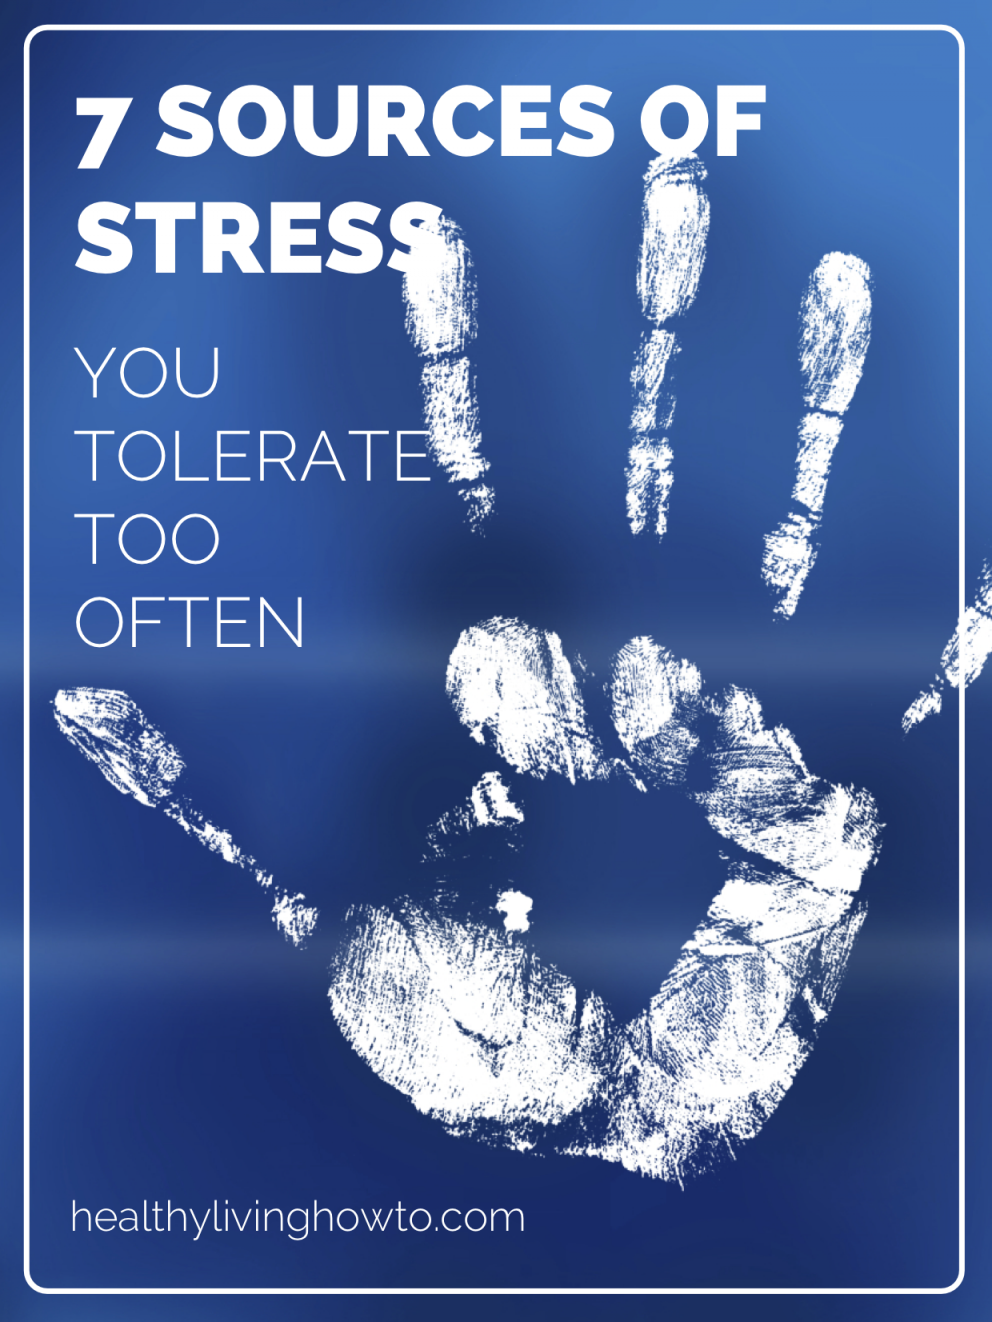 7 Sources of Stress You Tolerate Too Often | healthylivinghowto.com